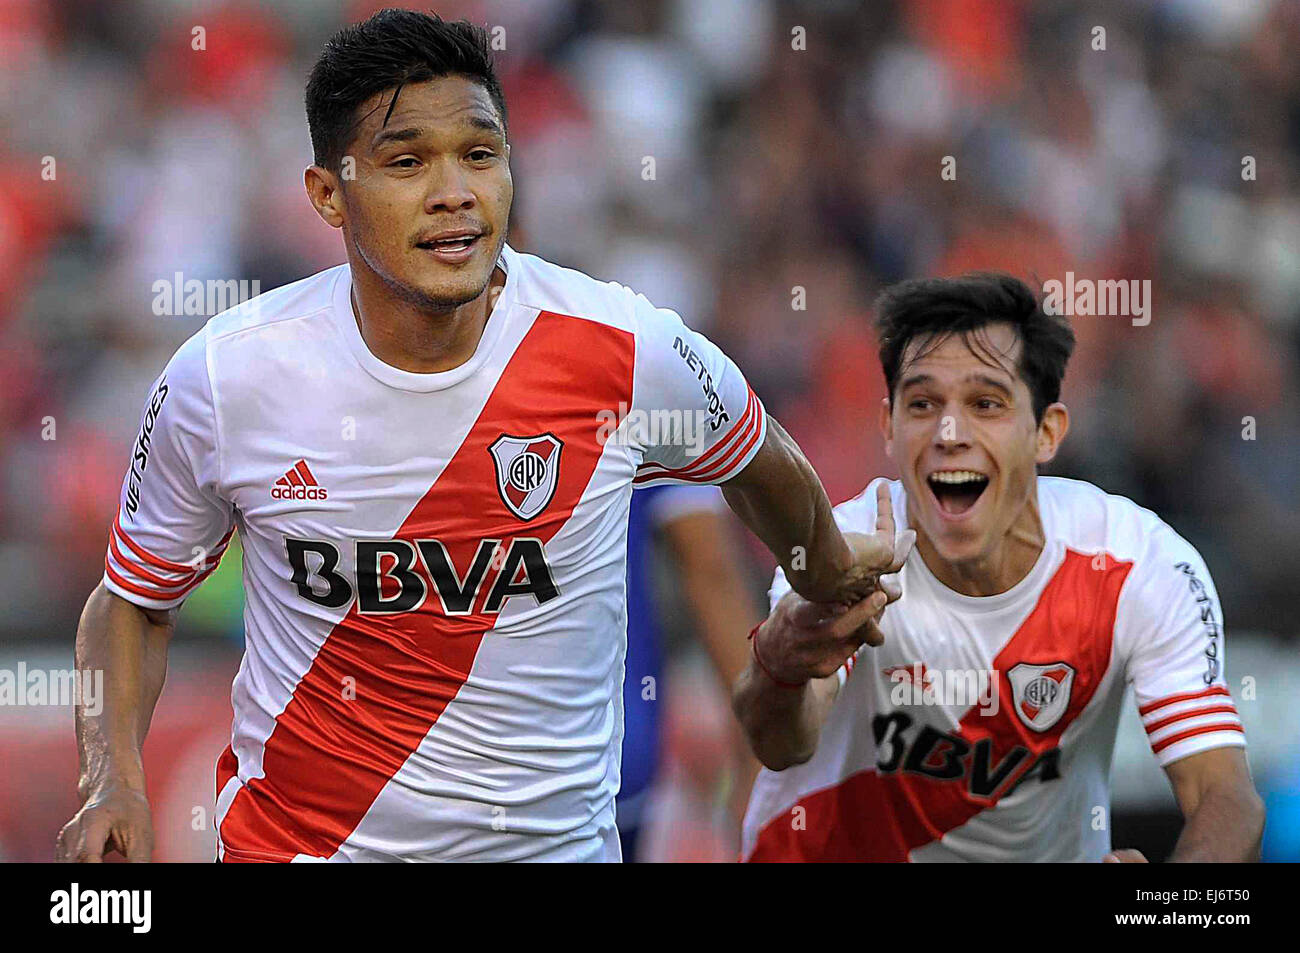 Buenos Aires, Argentina. 22nd Mar, 2015. River Plate's Teofilo Gutierrez (L) celebrates a score during the match corresponding to the first division championship of the Argentine soccer against Godoy Cruz, in the Monumental Stadium, in Buenos Aires, Argentina, on March 22, 2015. River Plate won the match. © Osvaldo Fanton/TELAM/Xinhua/Alamy Live News Stock Photo